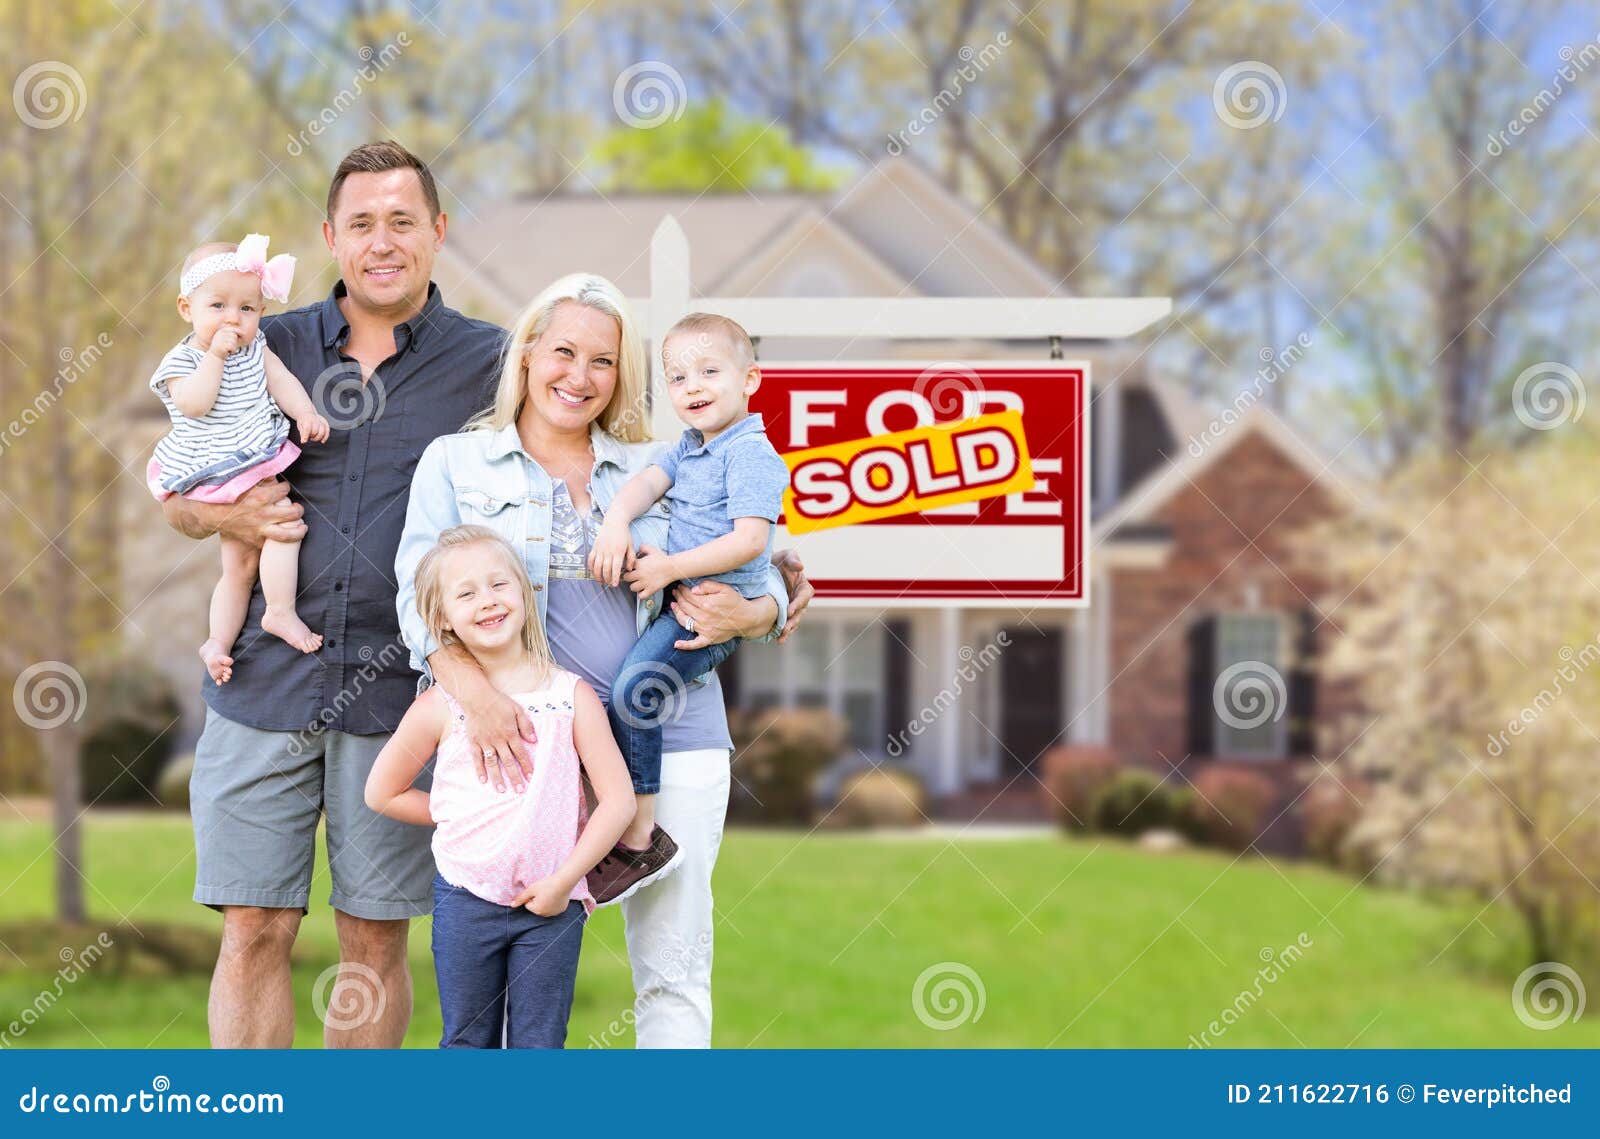 happy family house sold